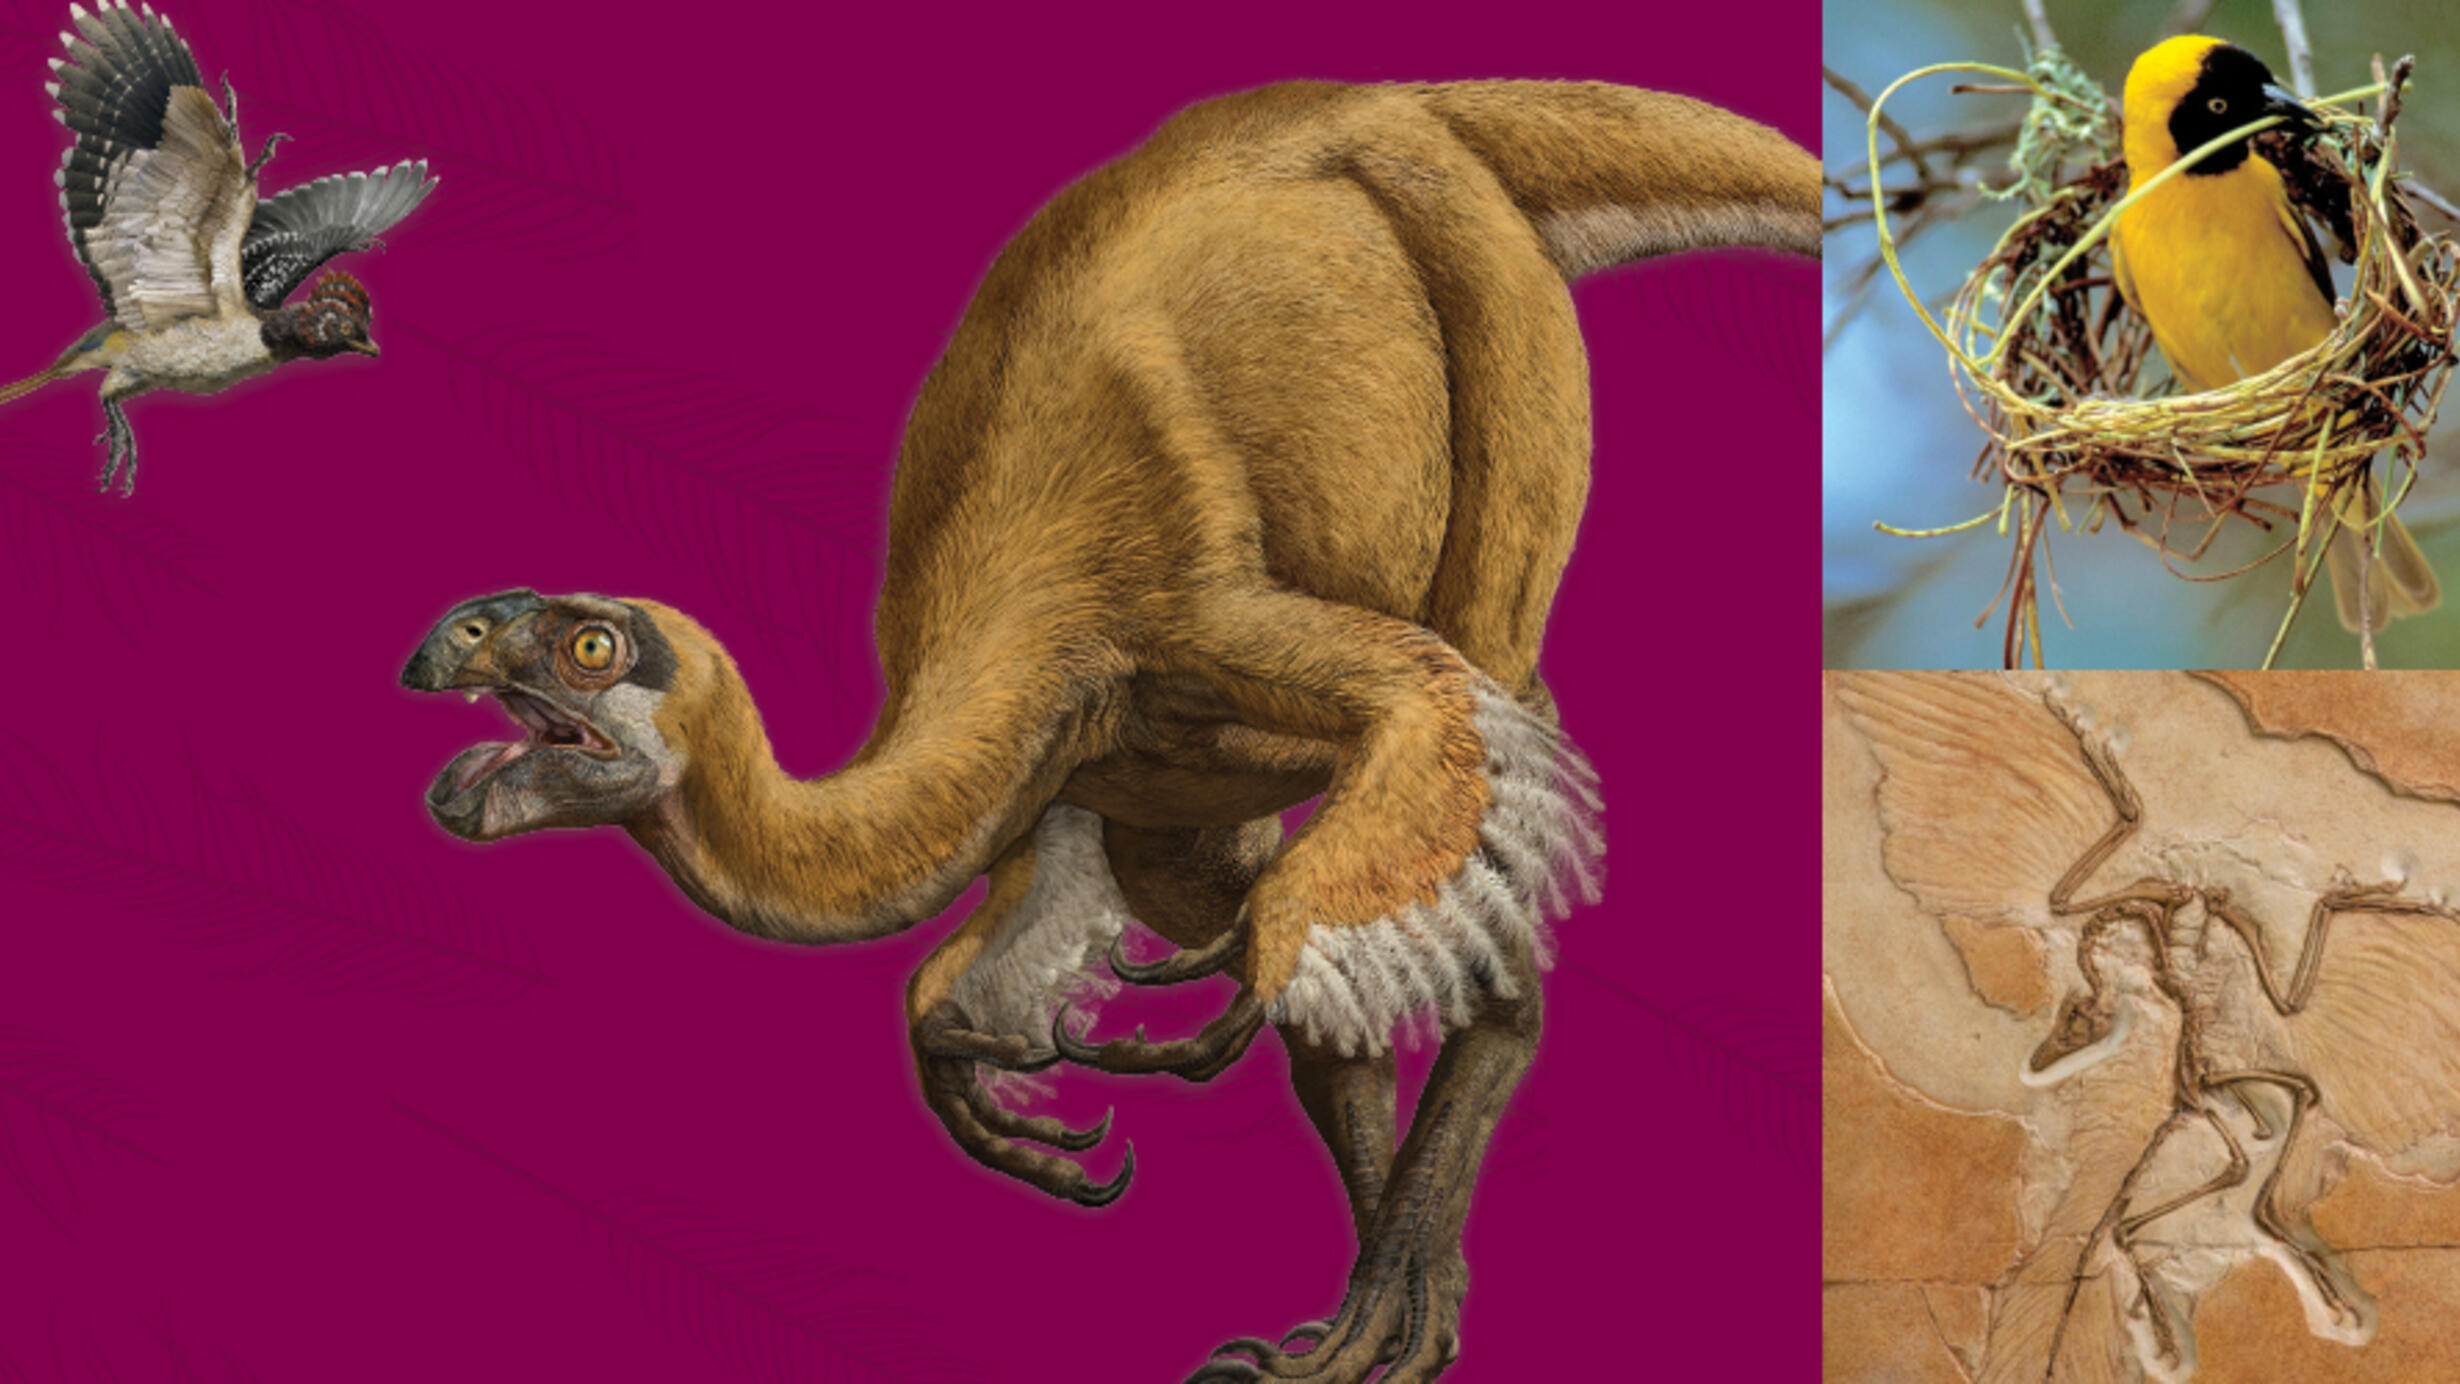 Collage of illustrated feathered dinosaur and a bird in flight (left), a bird in a nest (top right), and a fossilized winged dinosaur (bottom right).